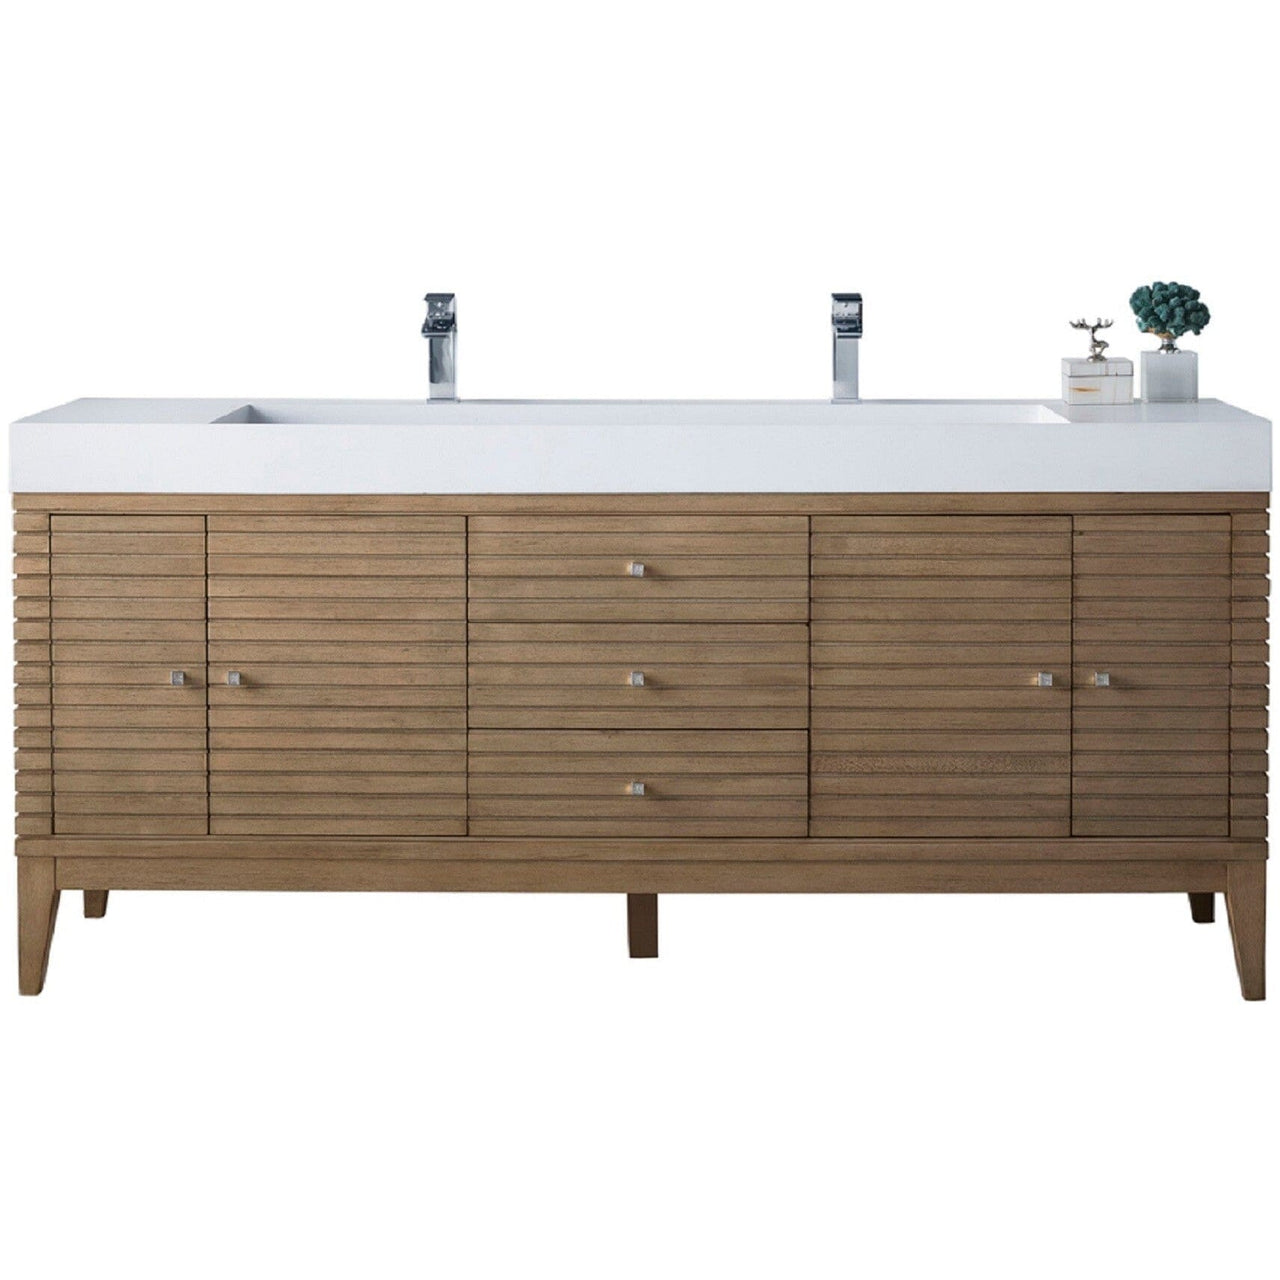 James Martin Linear 72" Double Vanity Vanity James Martin Whitewashed Walnut w/ Glossy White Composite Top 